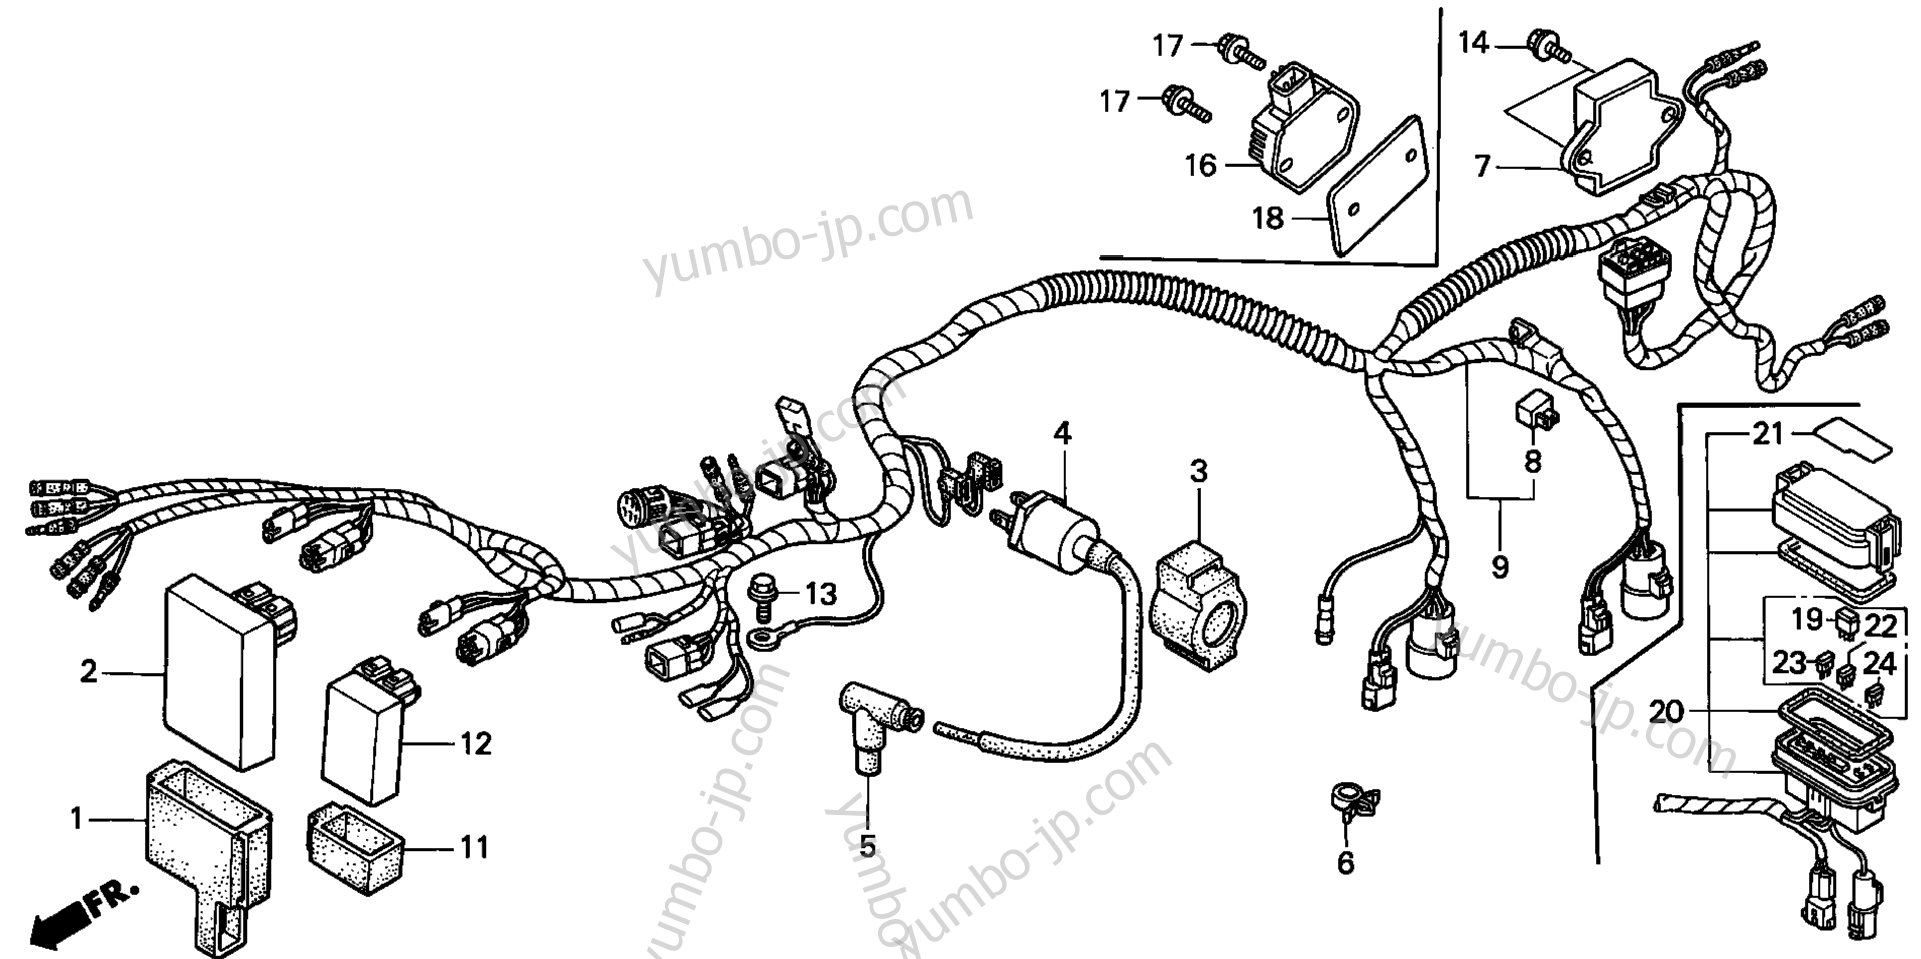 WIRE HARNESS for ATVs HONDA TRX400FW A 1995 year